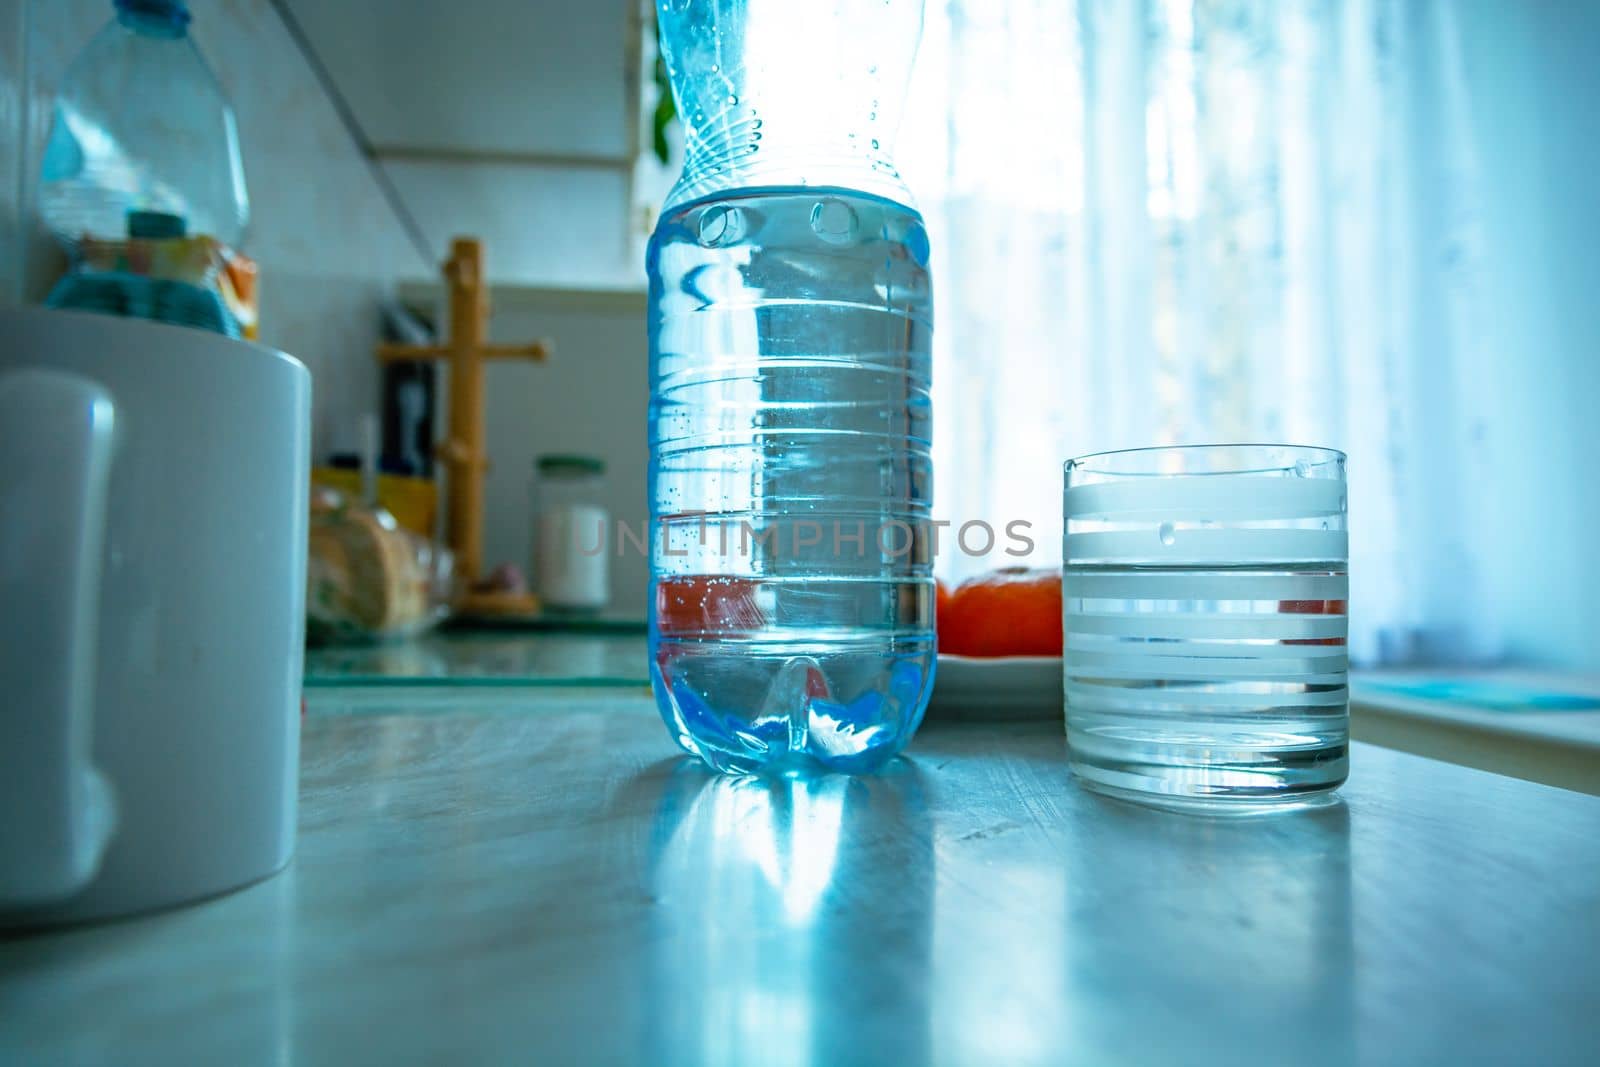 A plastic water bottle and an empty glass standing on the kitchen counter